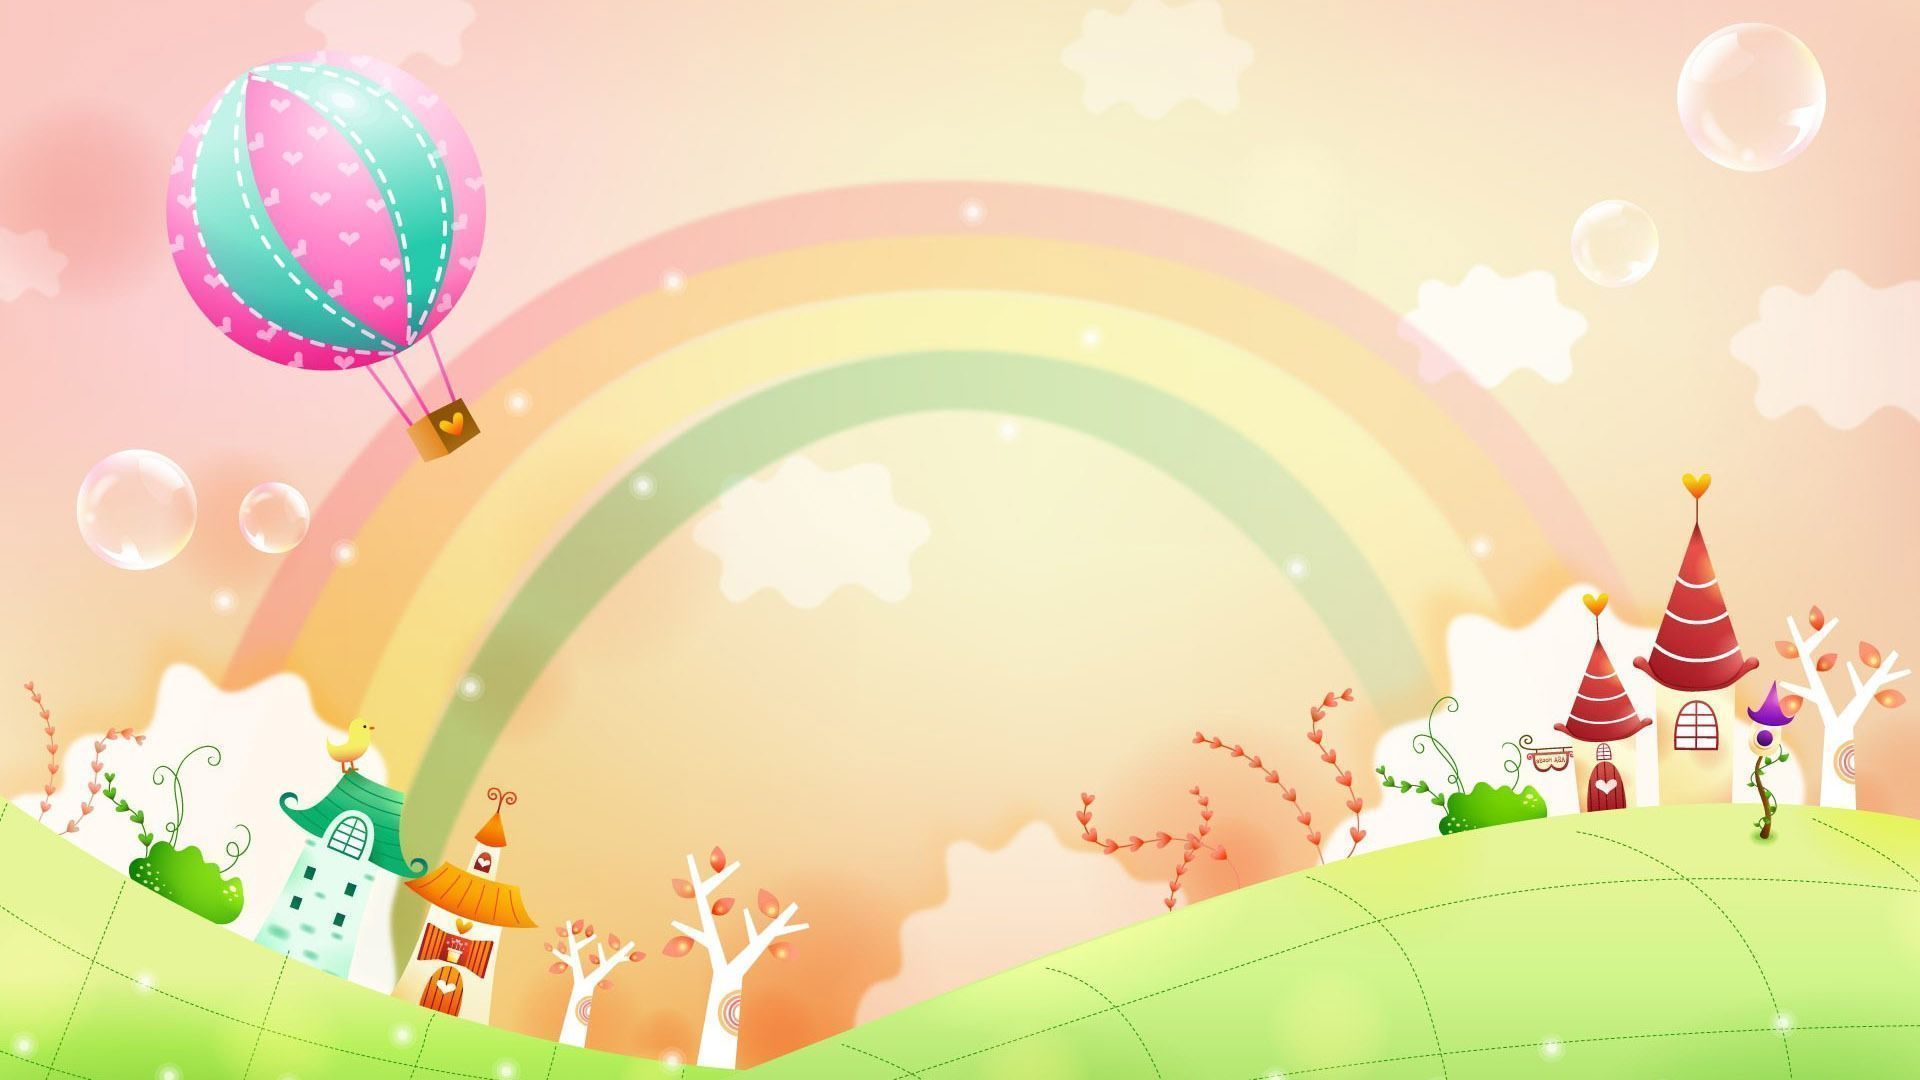 Rainbow over small town wallpaper - Free Wide HD Wallpaper